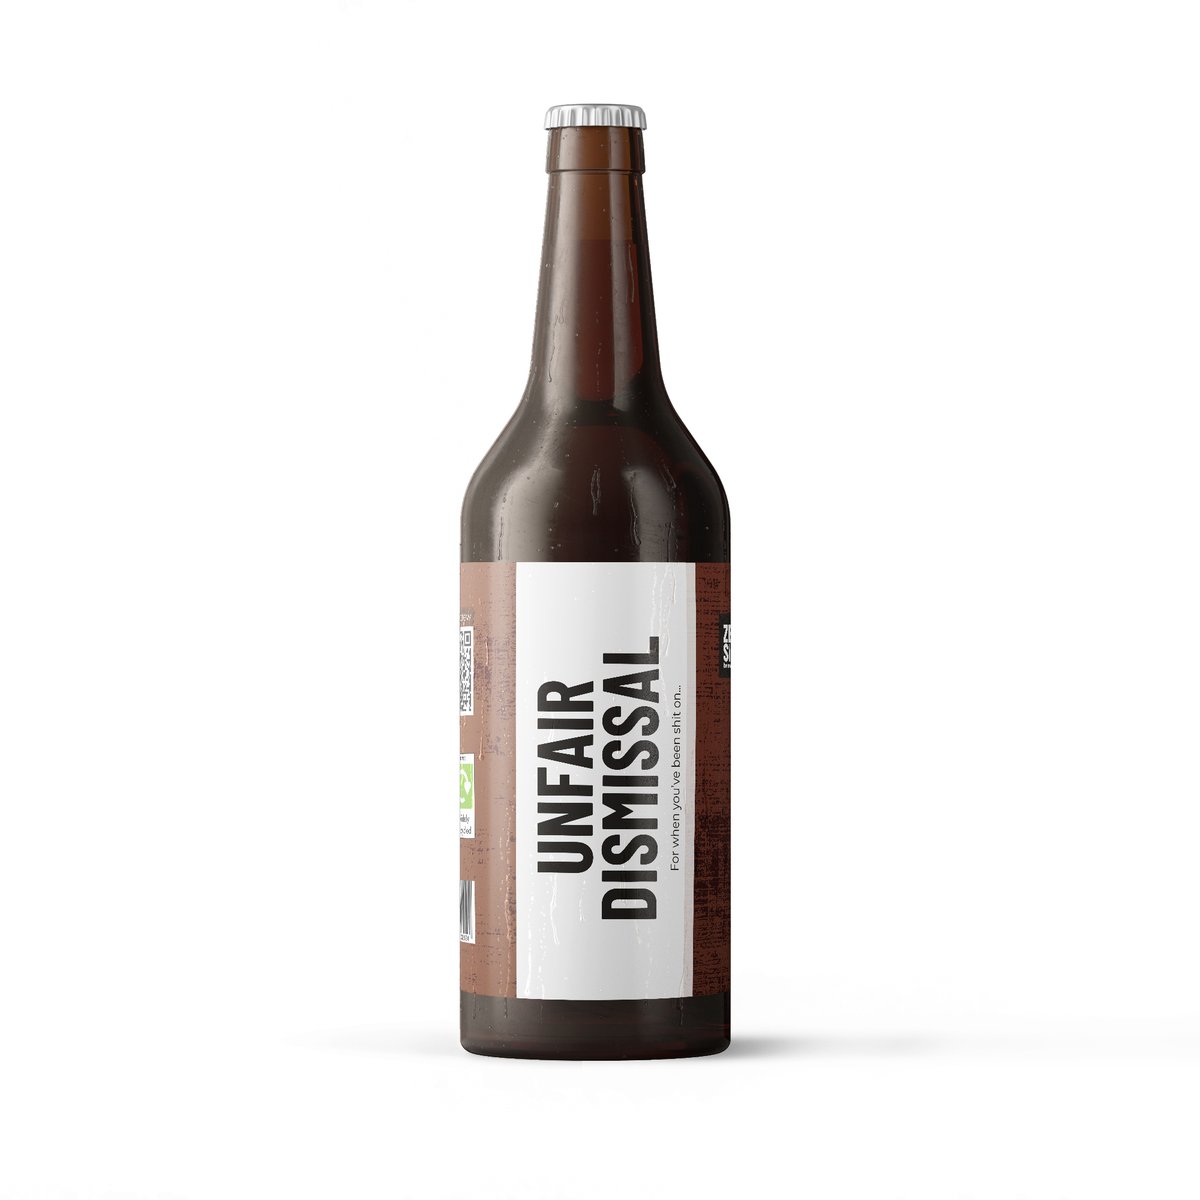 Now here's an offer... £8.99 price reduction and FREE delivery on Unfair Dismissal... when purchased in 6! You love it... vist.ly/46et #craftale #craftbeer #useusorloseus